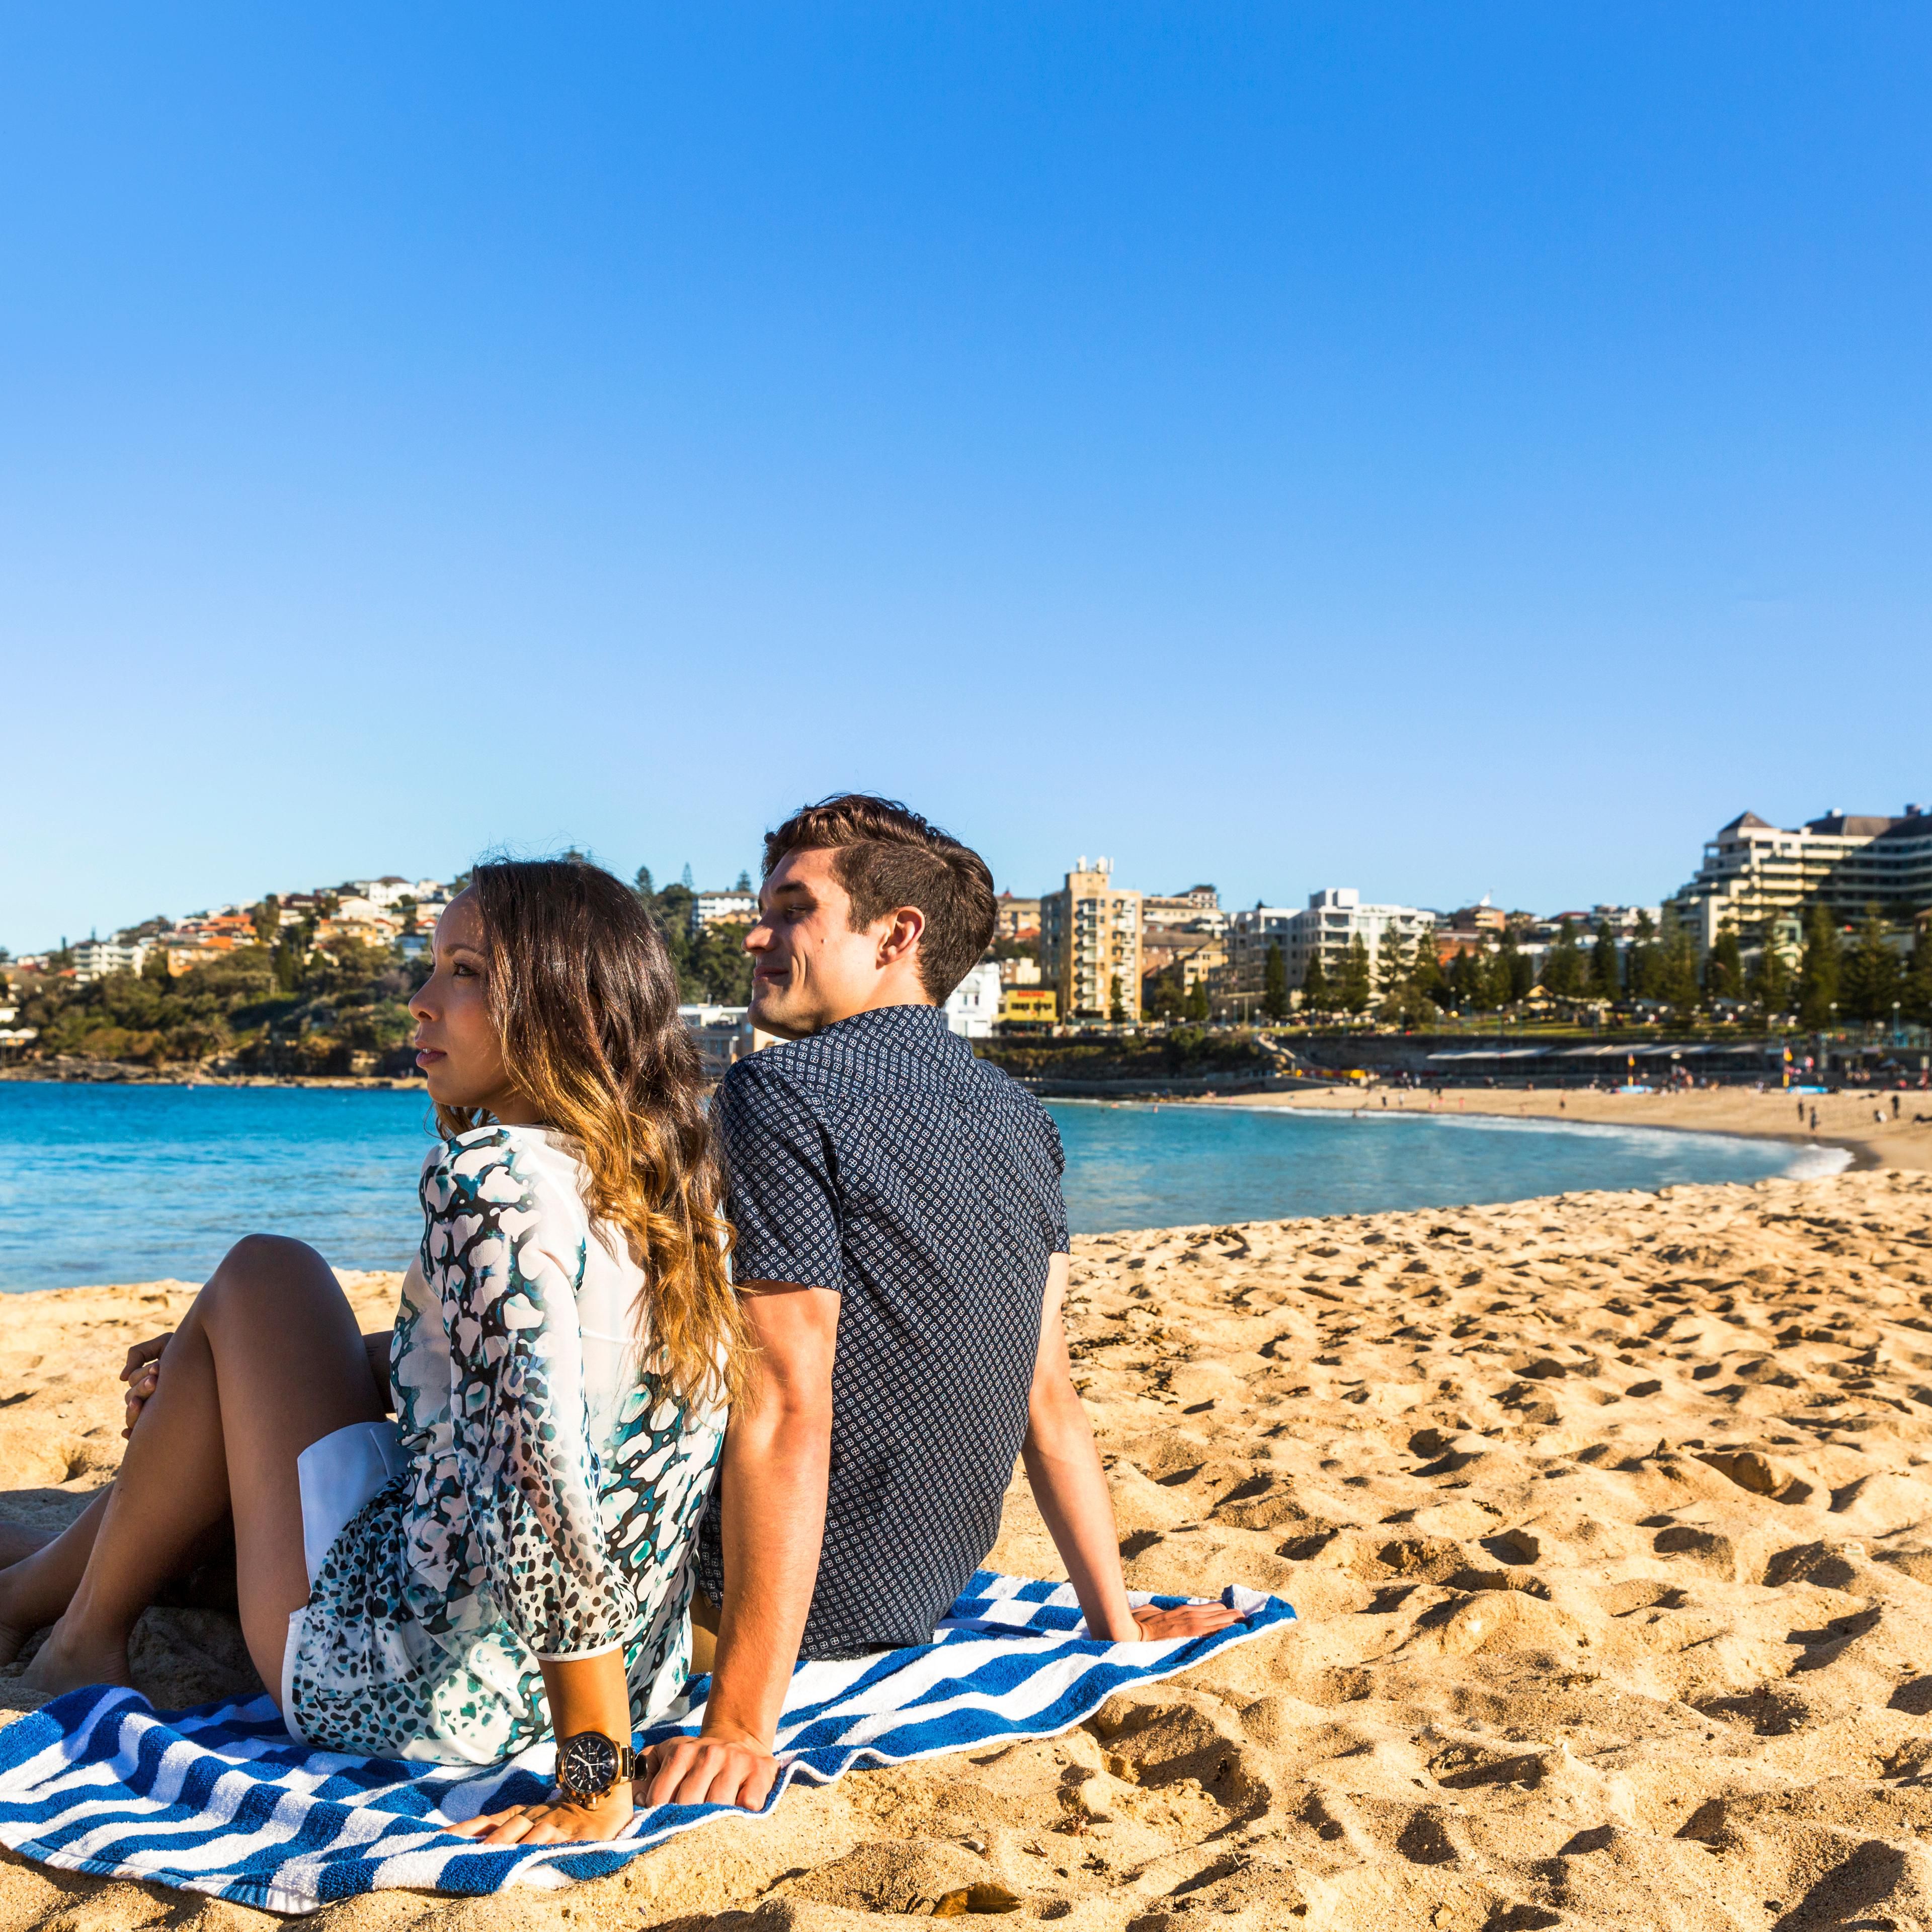 Enjoy a relaxing day on the sand at Coogee Beach